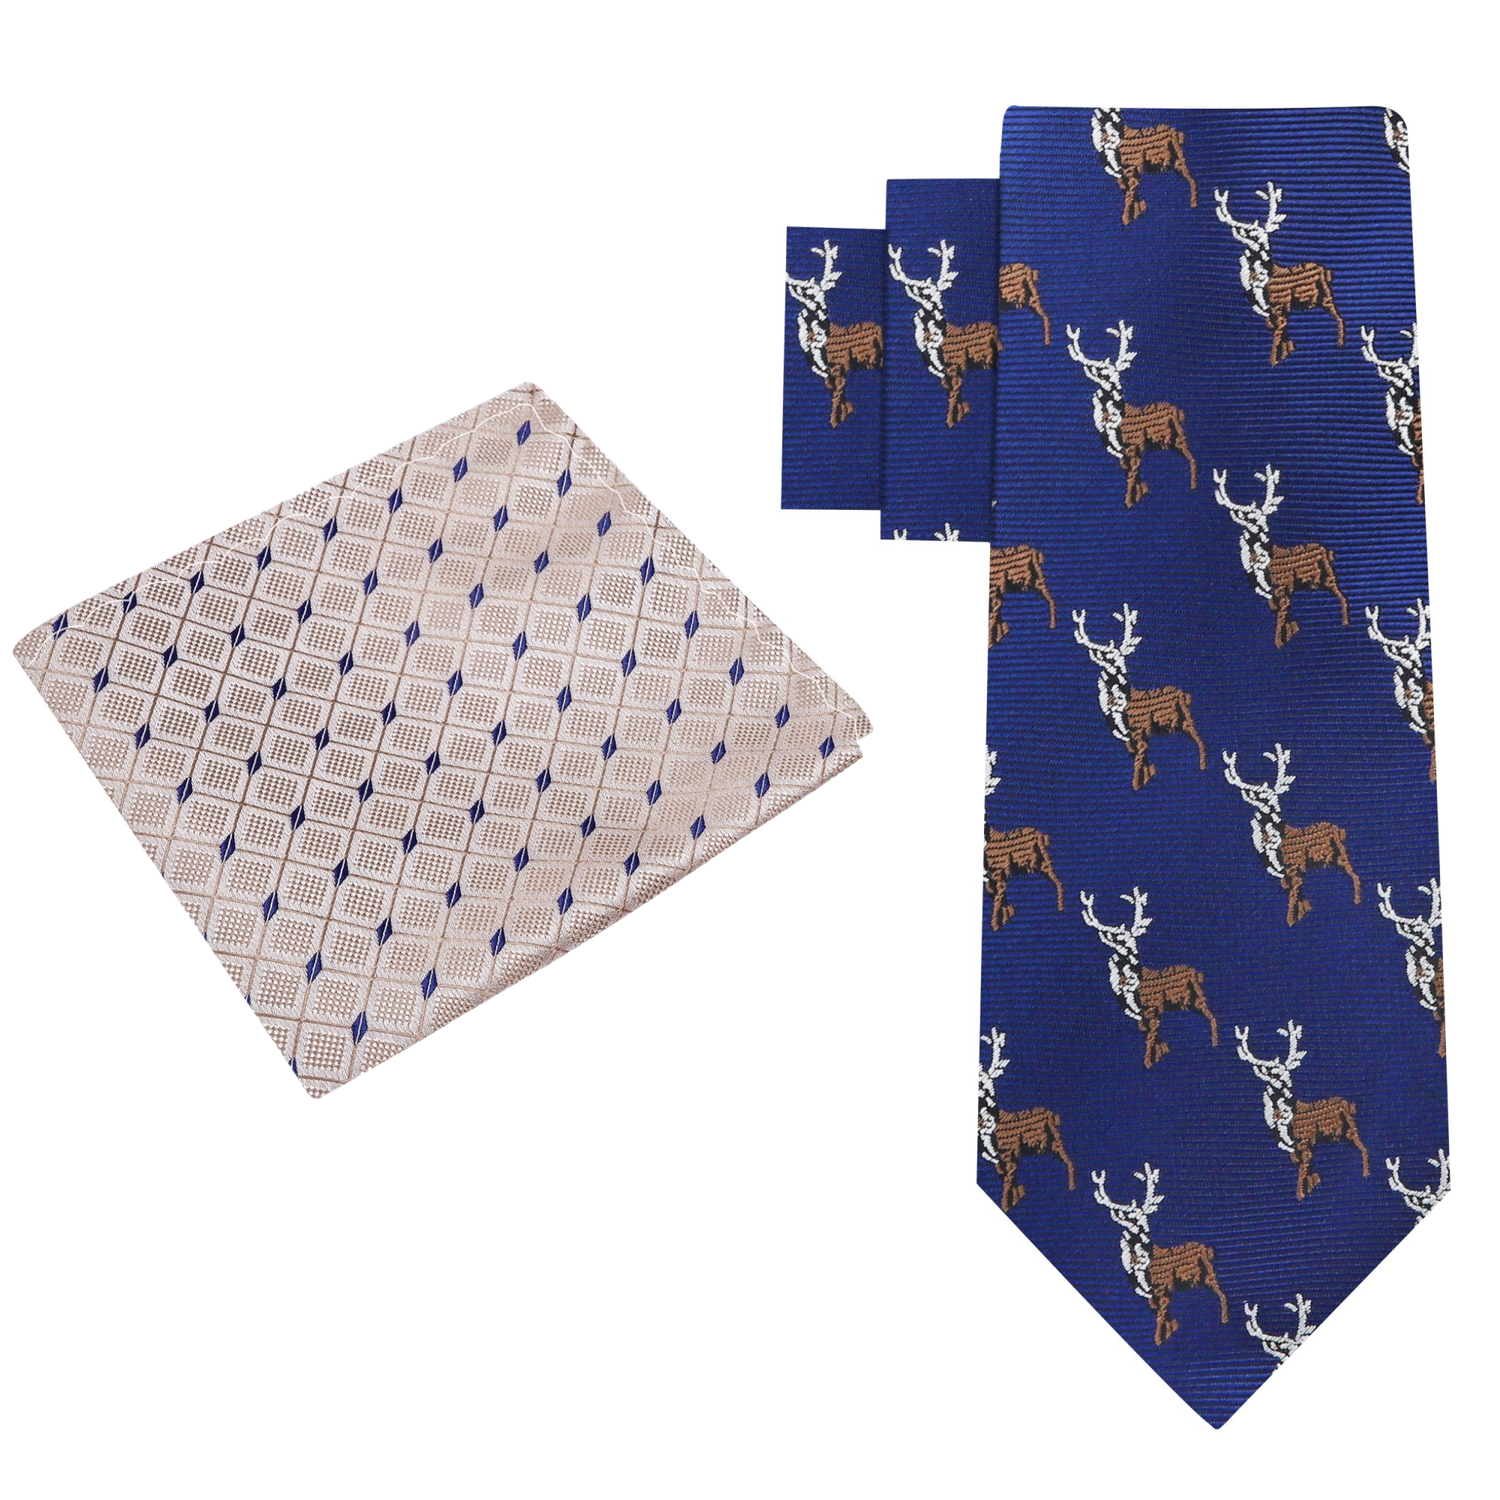 Alt View: Blue, Brown Antlered Deer Tie and Light Brown, Blue Geometric Square